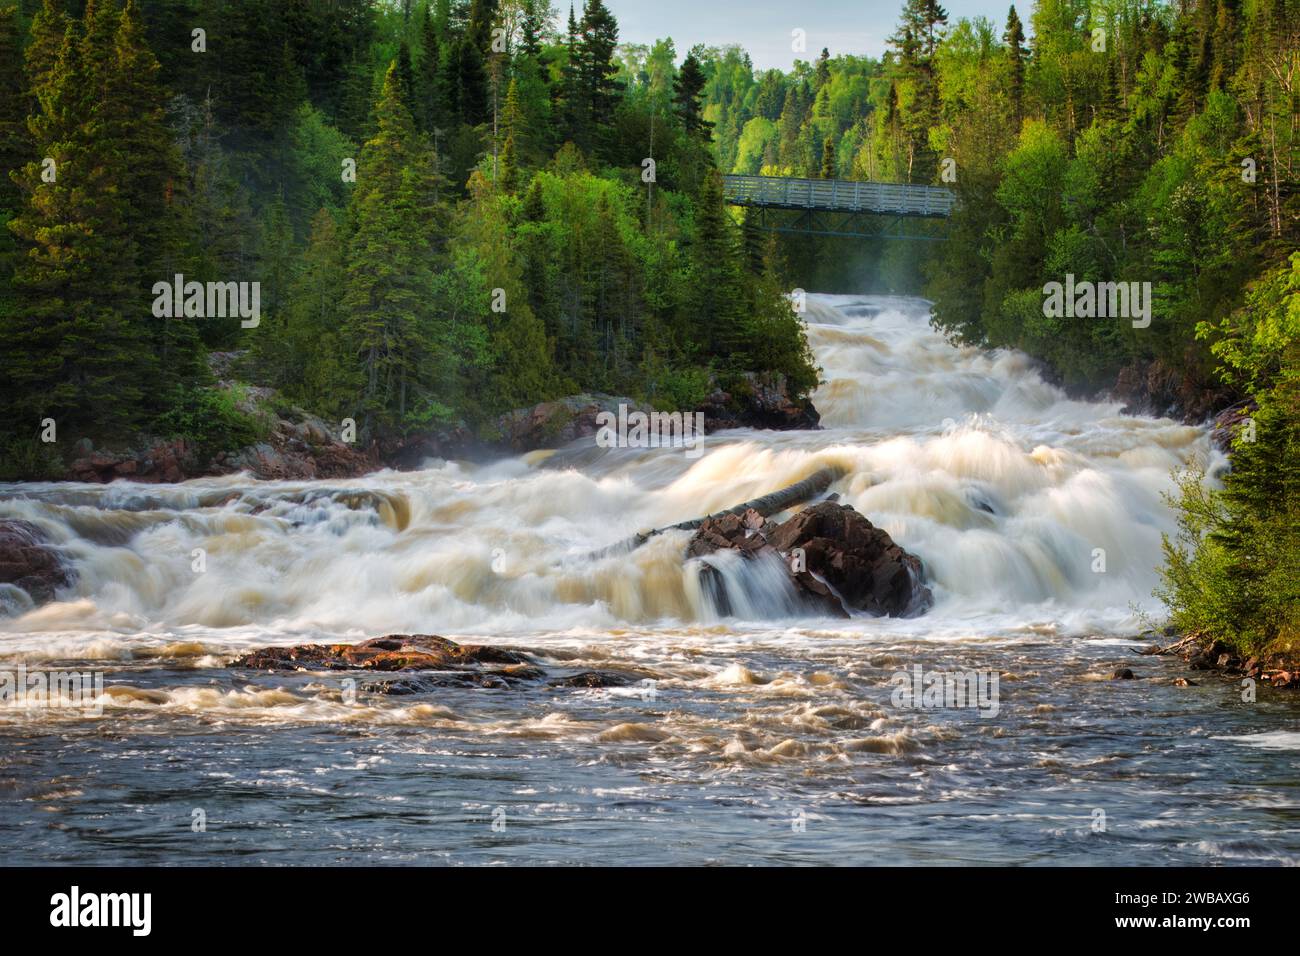 Lower Aguasabon Falls and bridge over Gorge, view from Terrace Bay at the north shore of Lake Superior, Ontario, Canada in summer Stock Photo